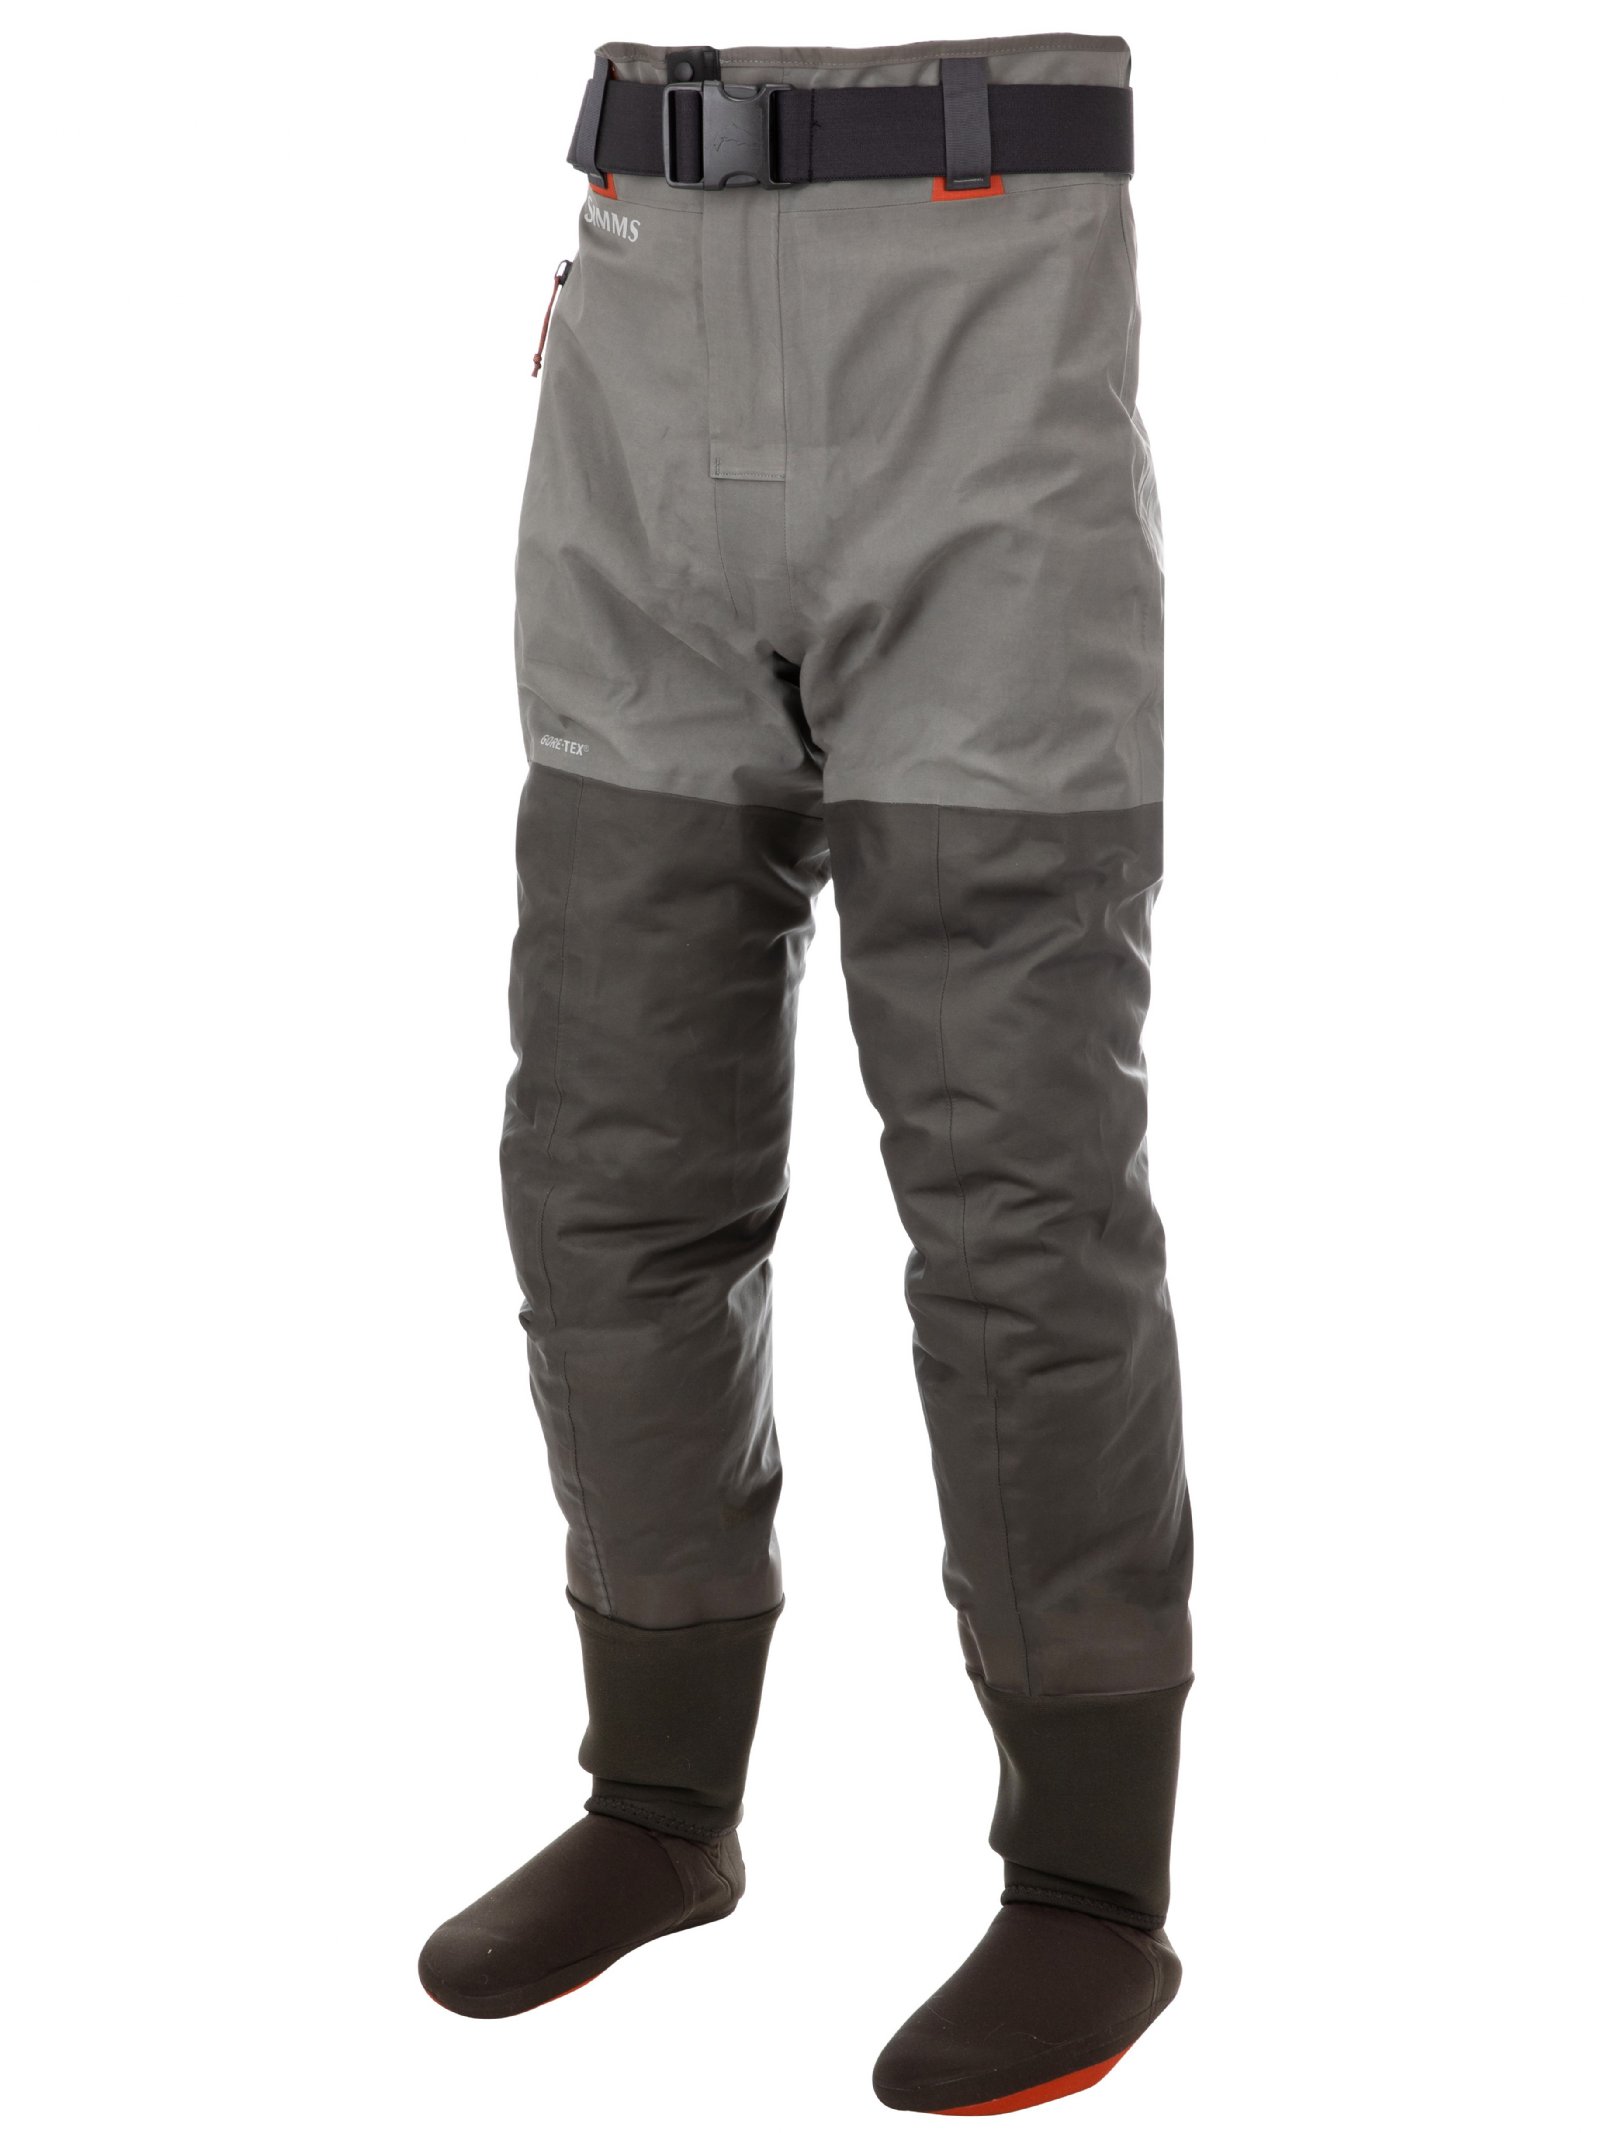 Simms M's G3 Guide Wading Pant - Small